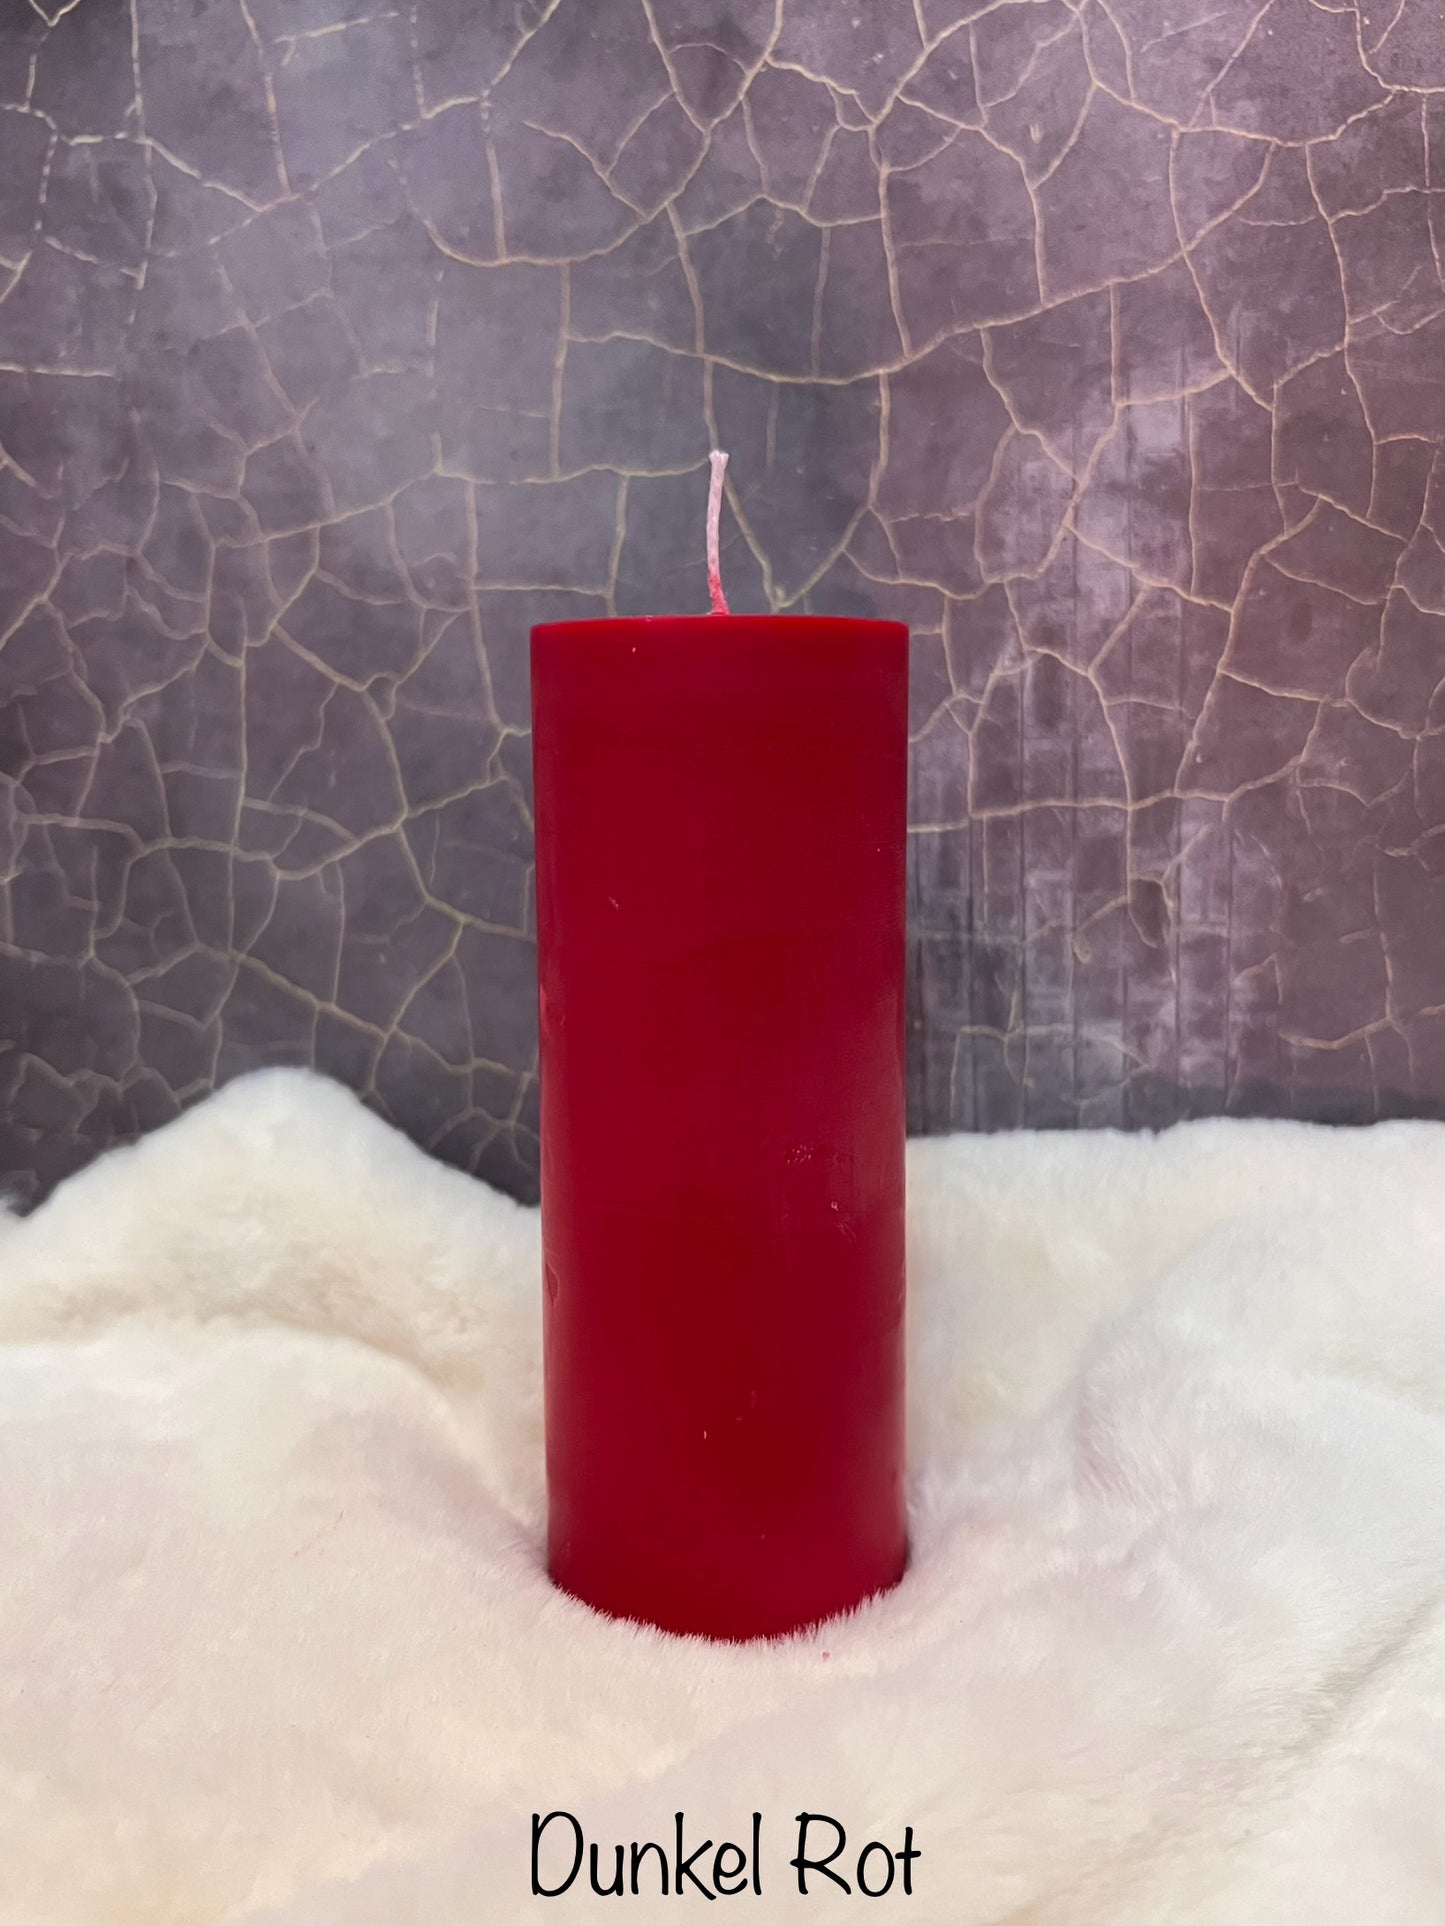 Wax Play Candles Set of 2